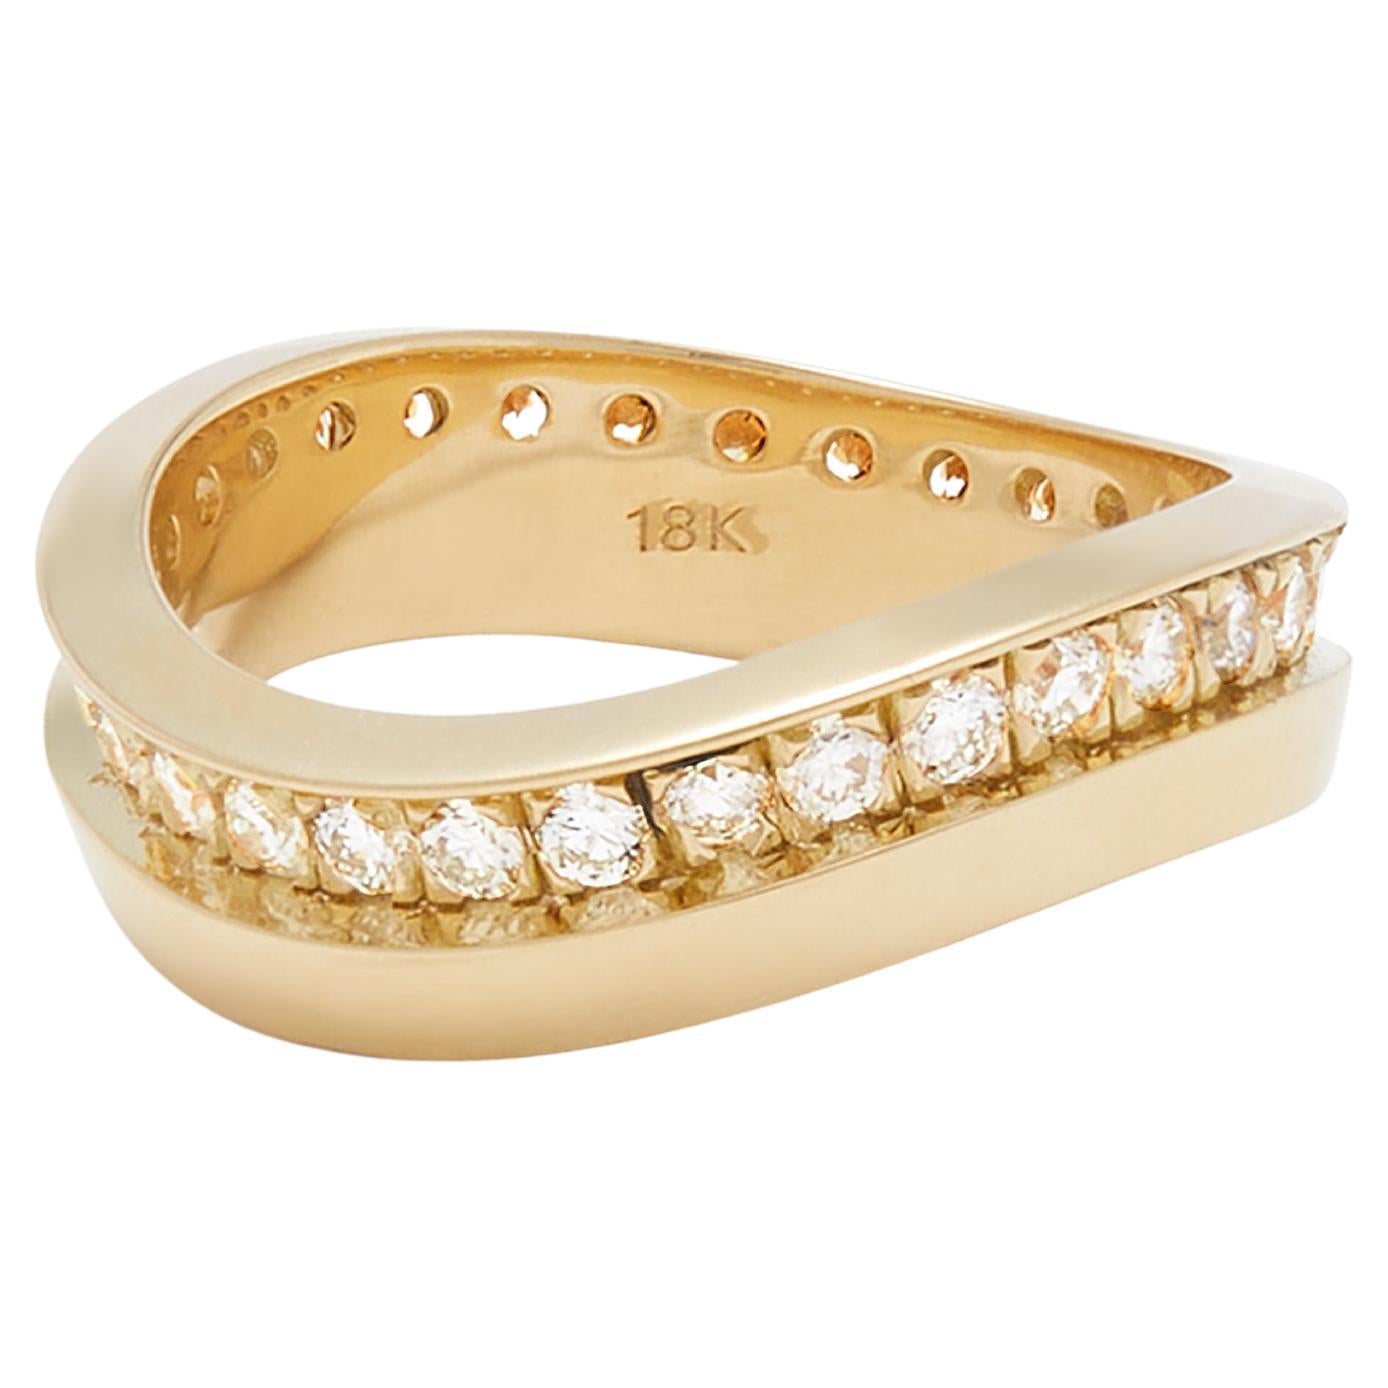 Casey Perez Tiered 18K Gold and Diamond Wave Band Stackable Ring - sz 6